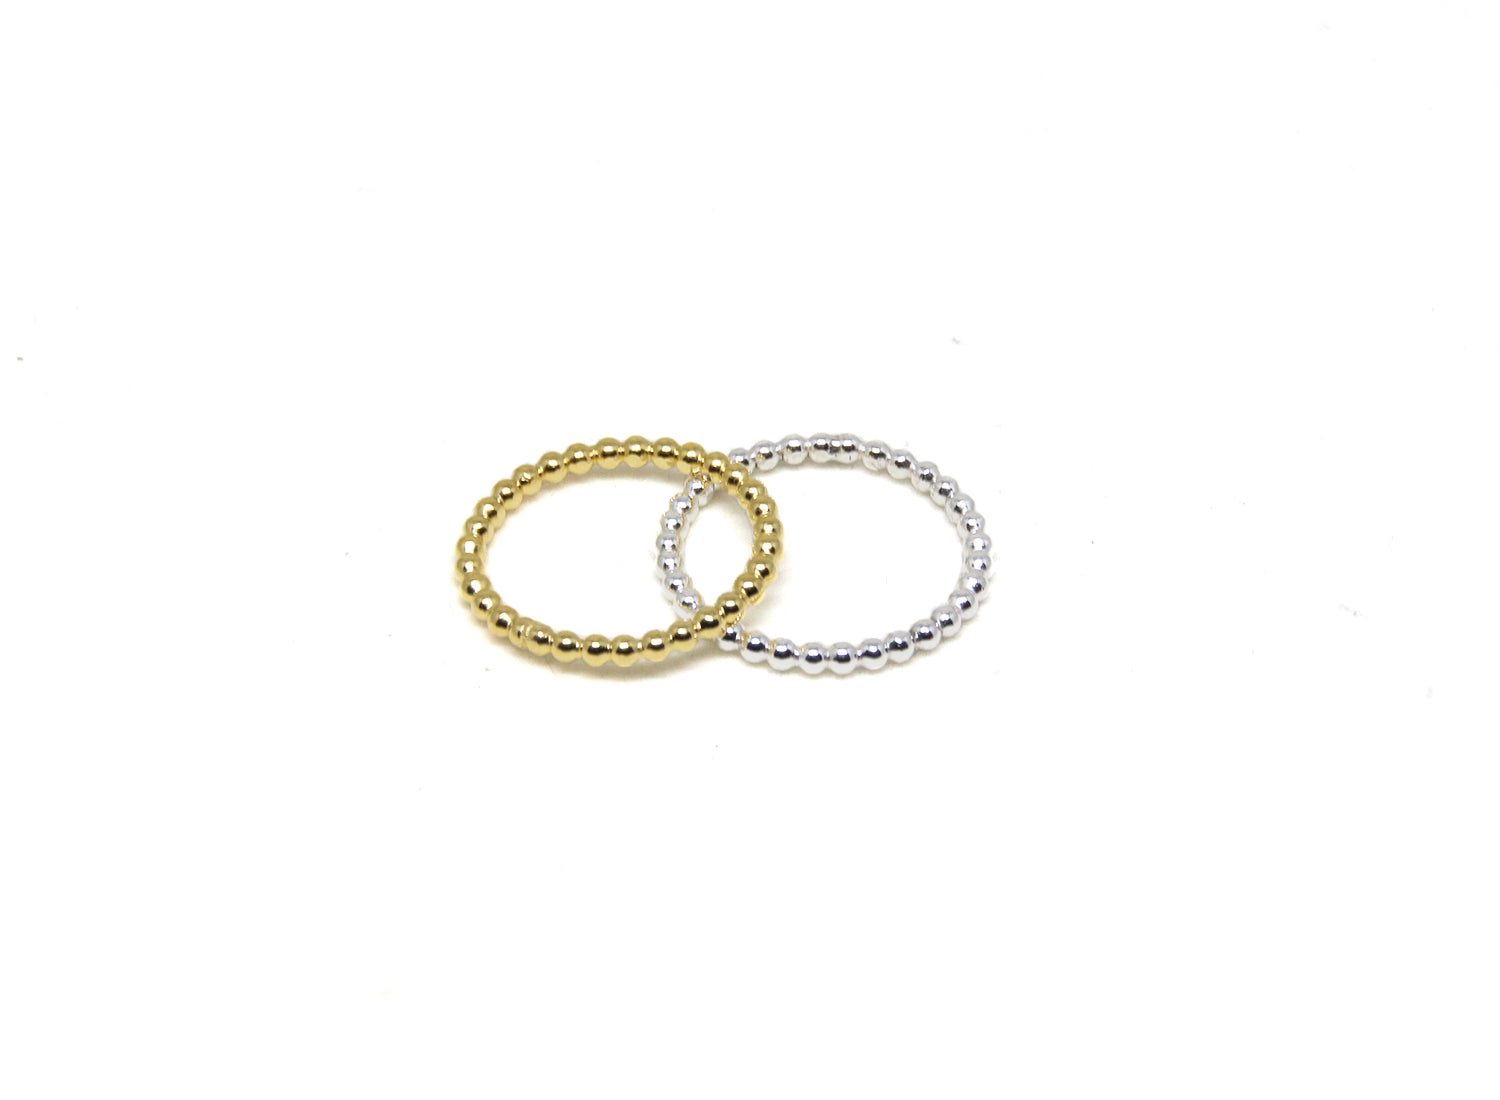 llayers jewelry Minimalist stacking vermeil ring with a beaded wire bague fine à empiler perlée en vermeil or